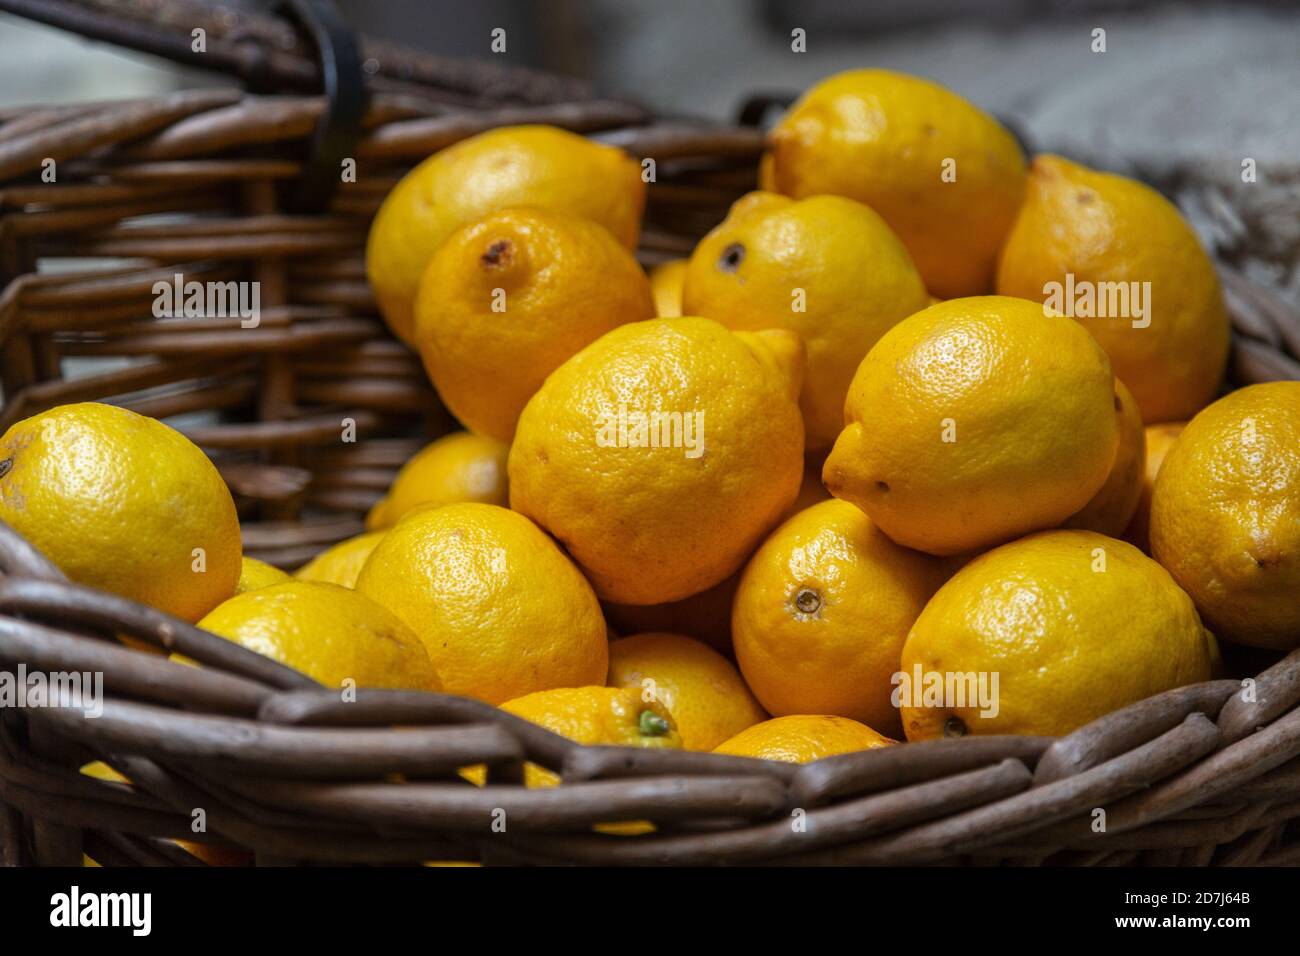 Lemons in a bicycle basket Stock Photo